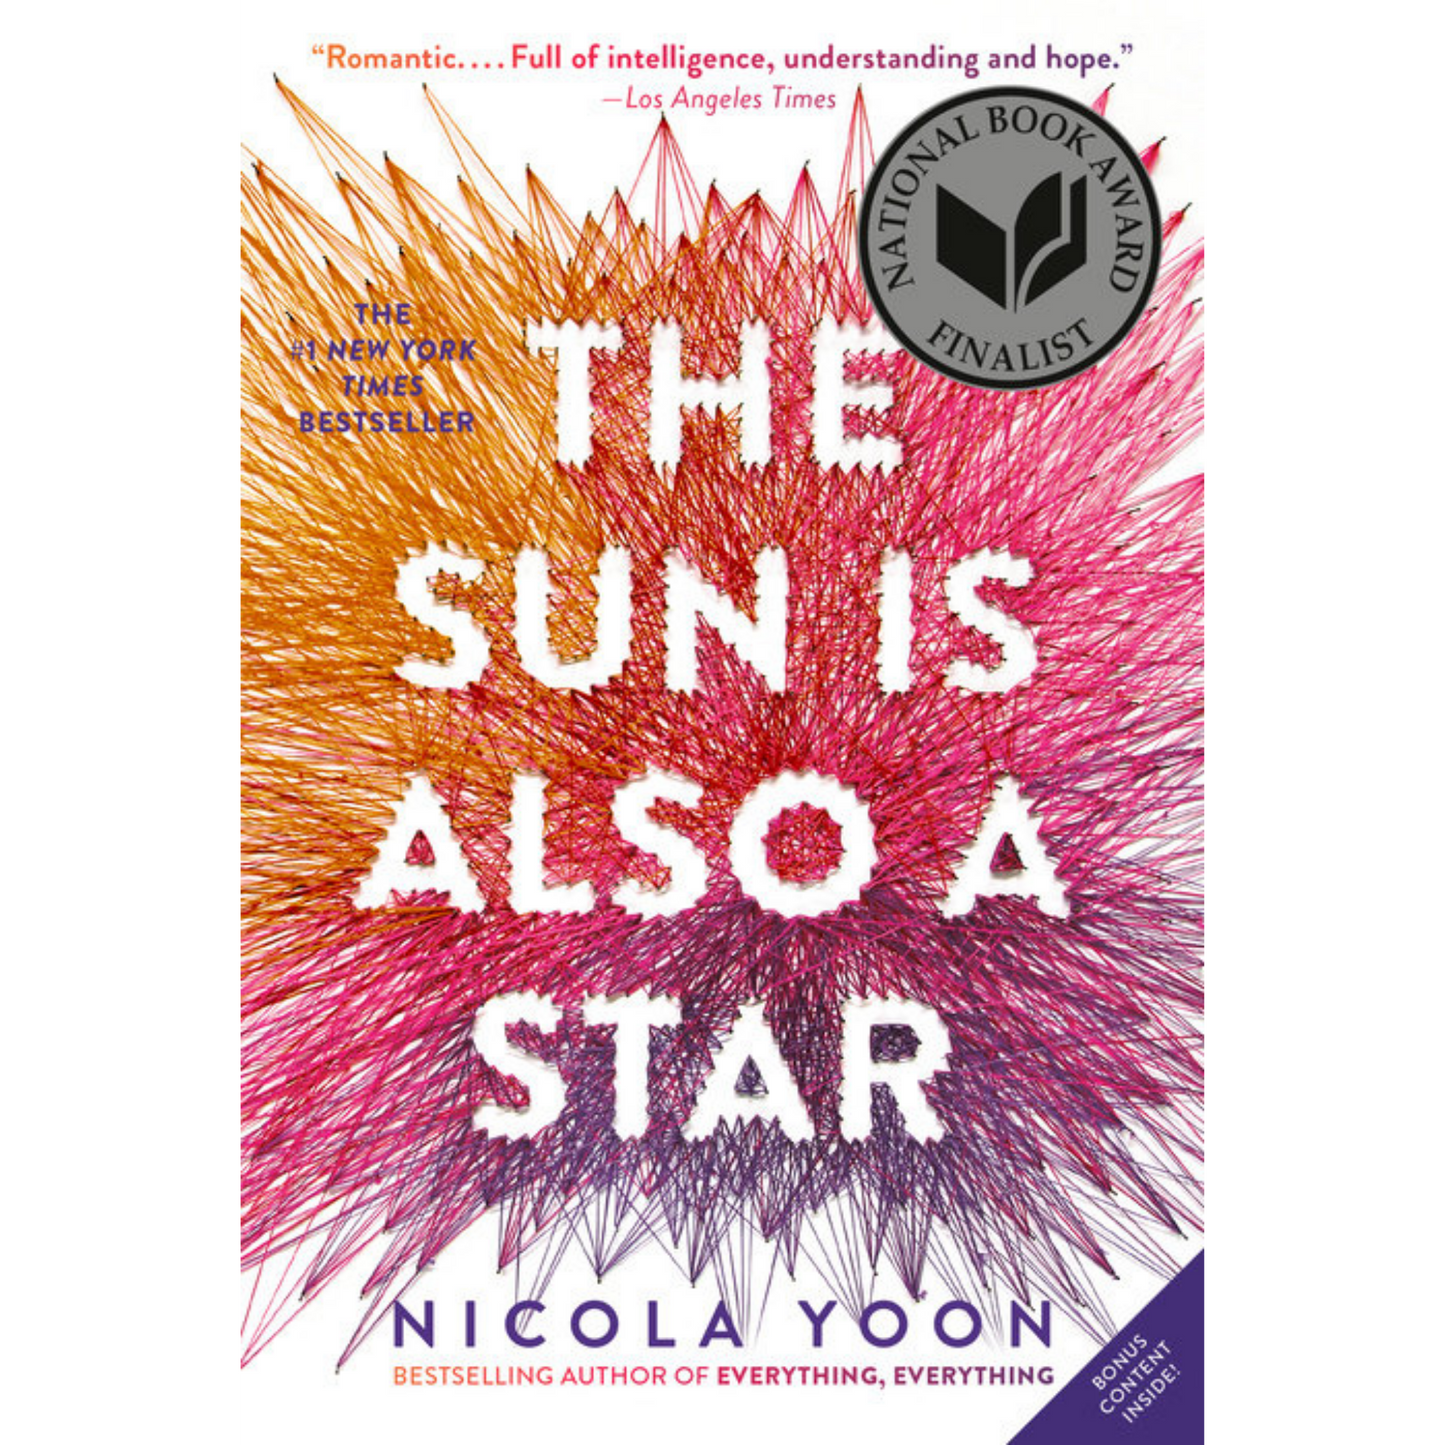 the sun is also a star nicola yoon